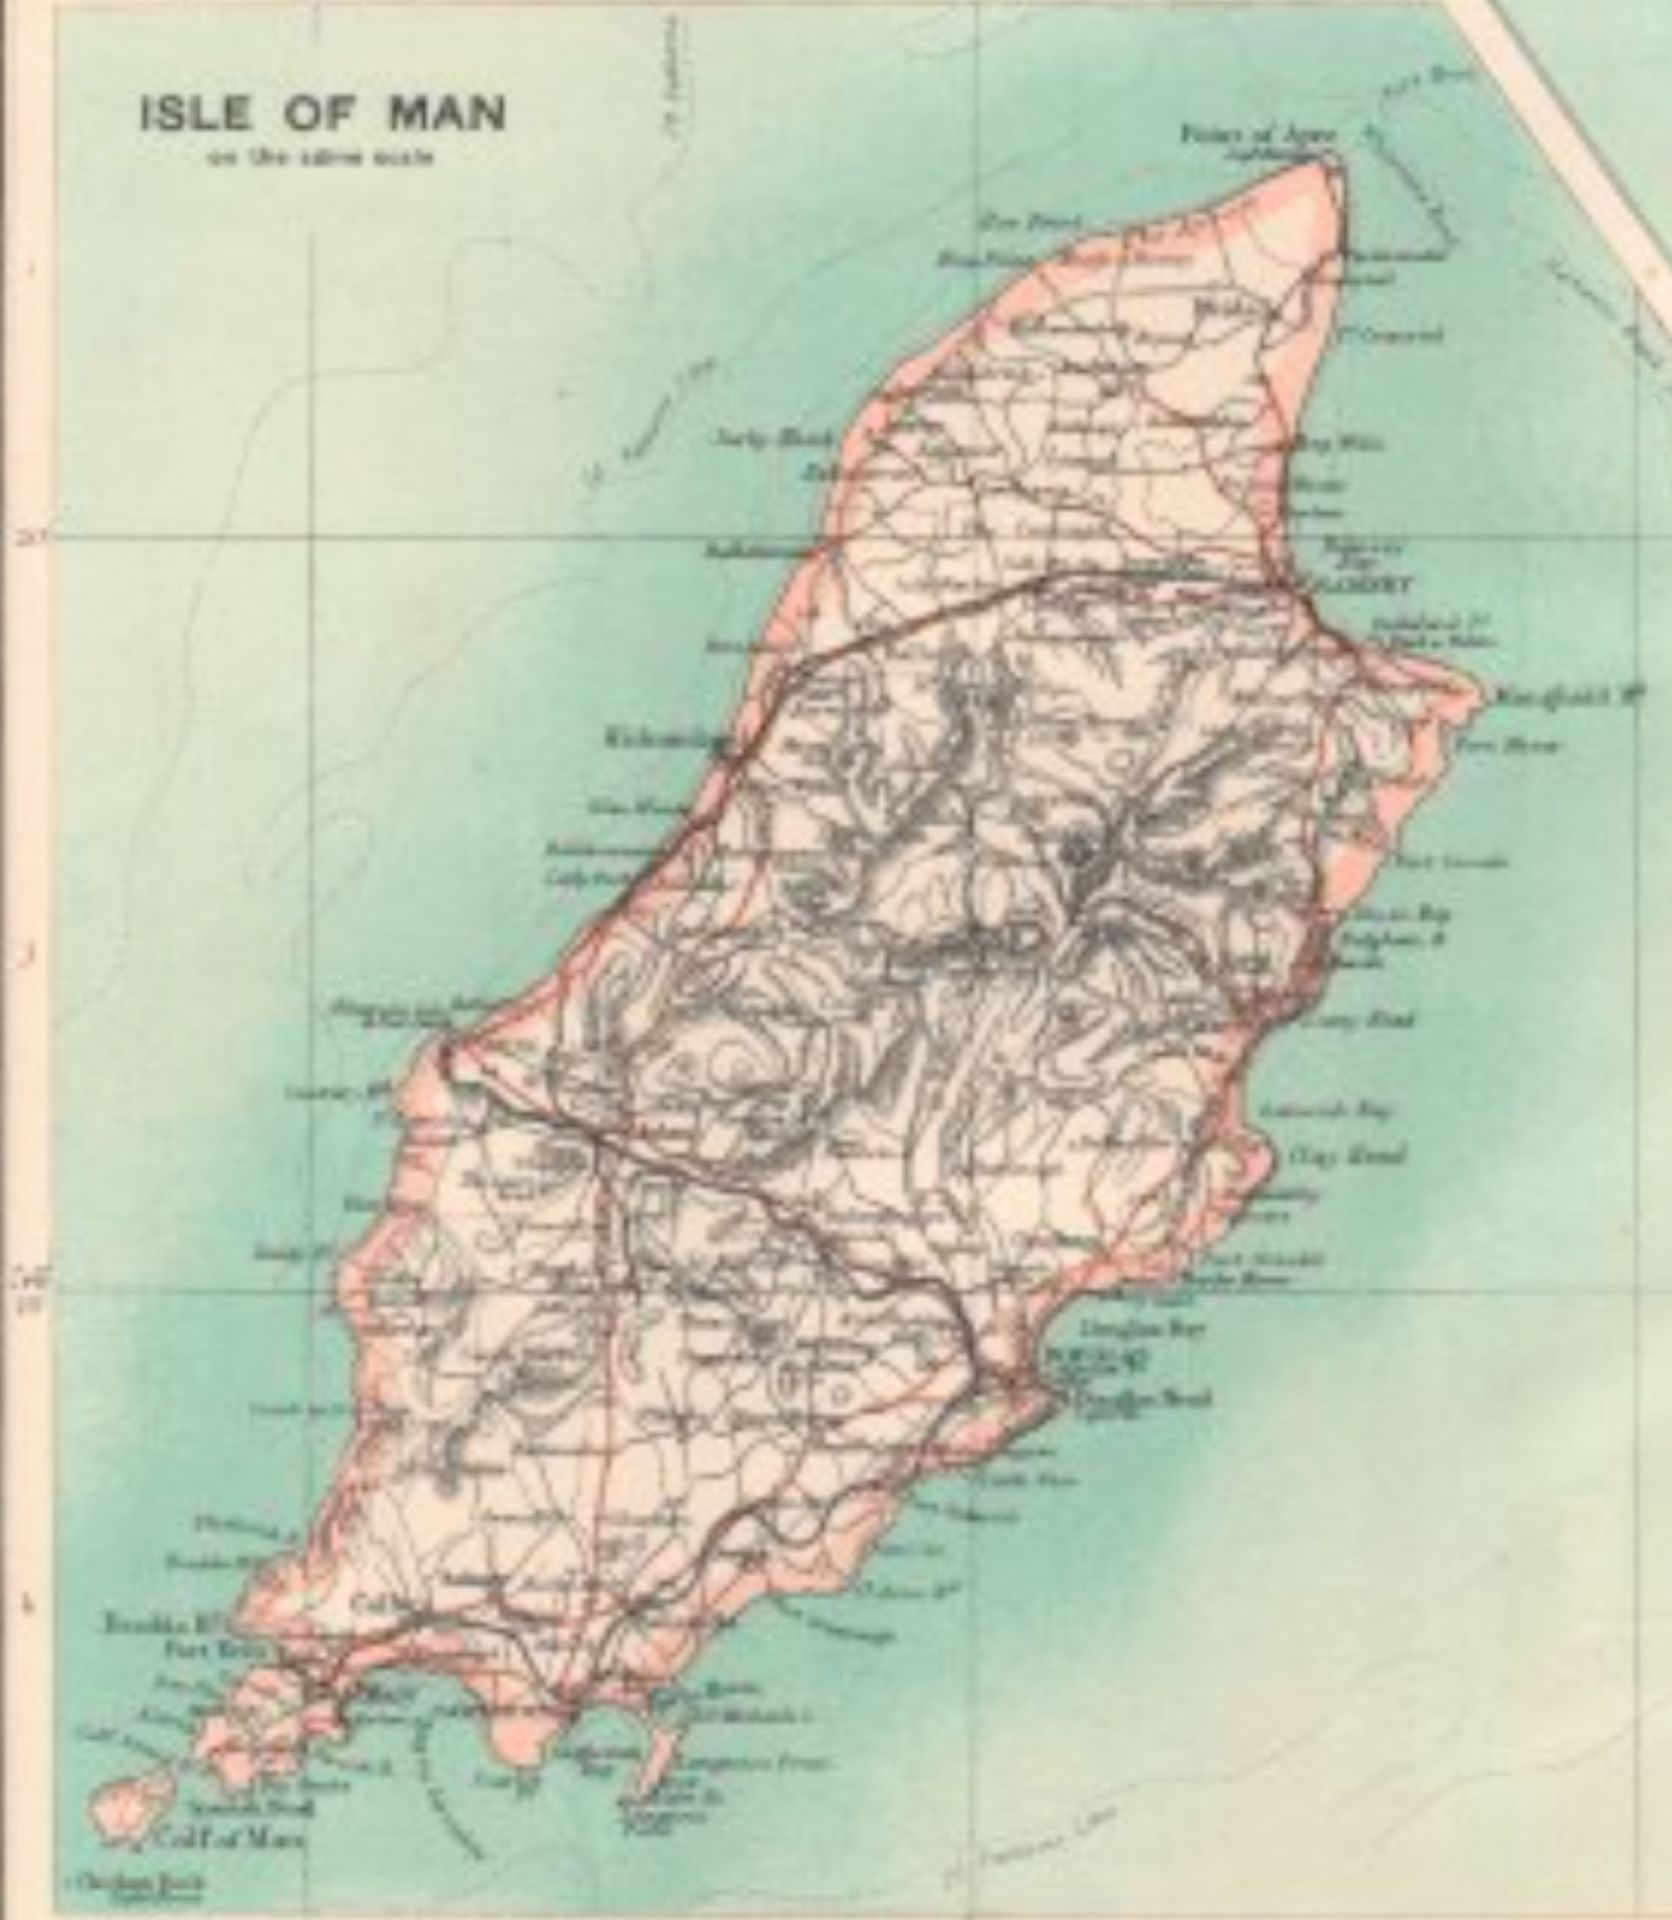 Victorian Antique Large 1897 Map Morecambe, Isle of Man, Lake District. - Image 2 of 2